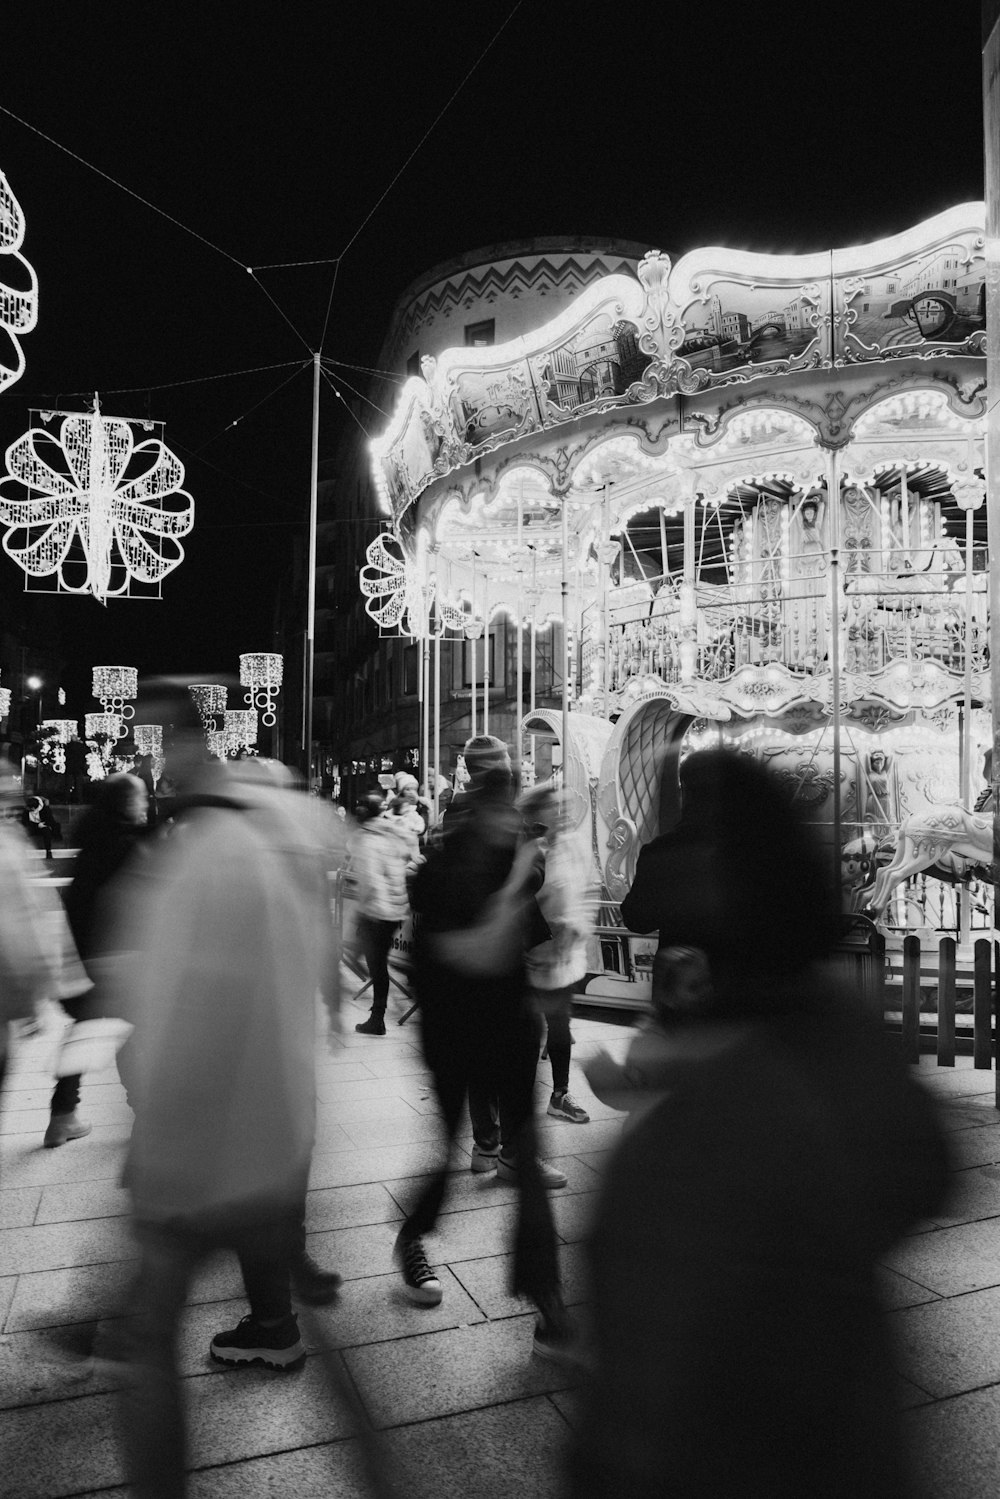 a black and white photo of a merry go round